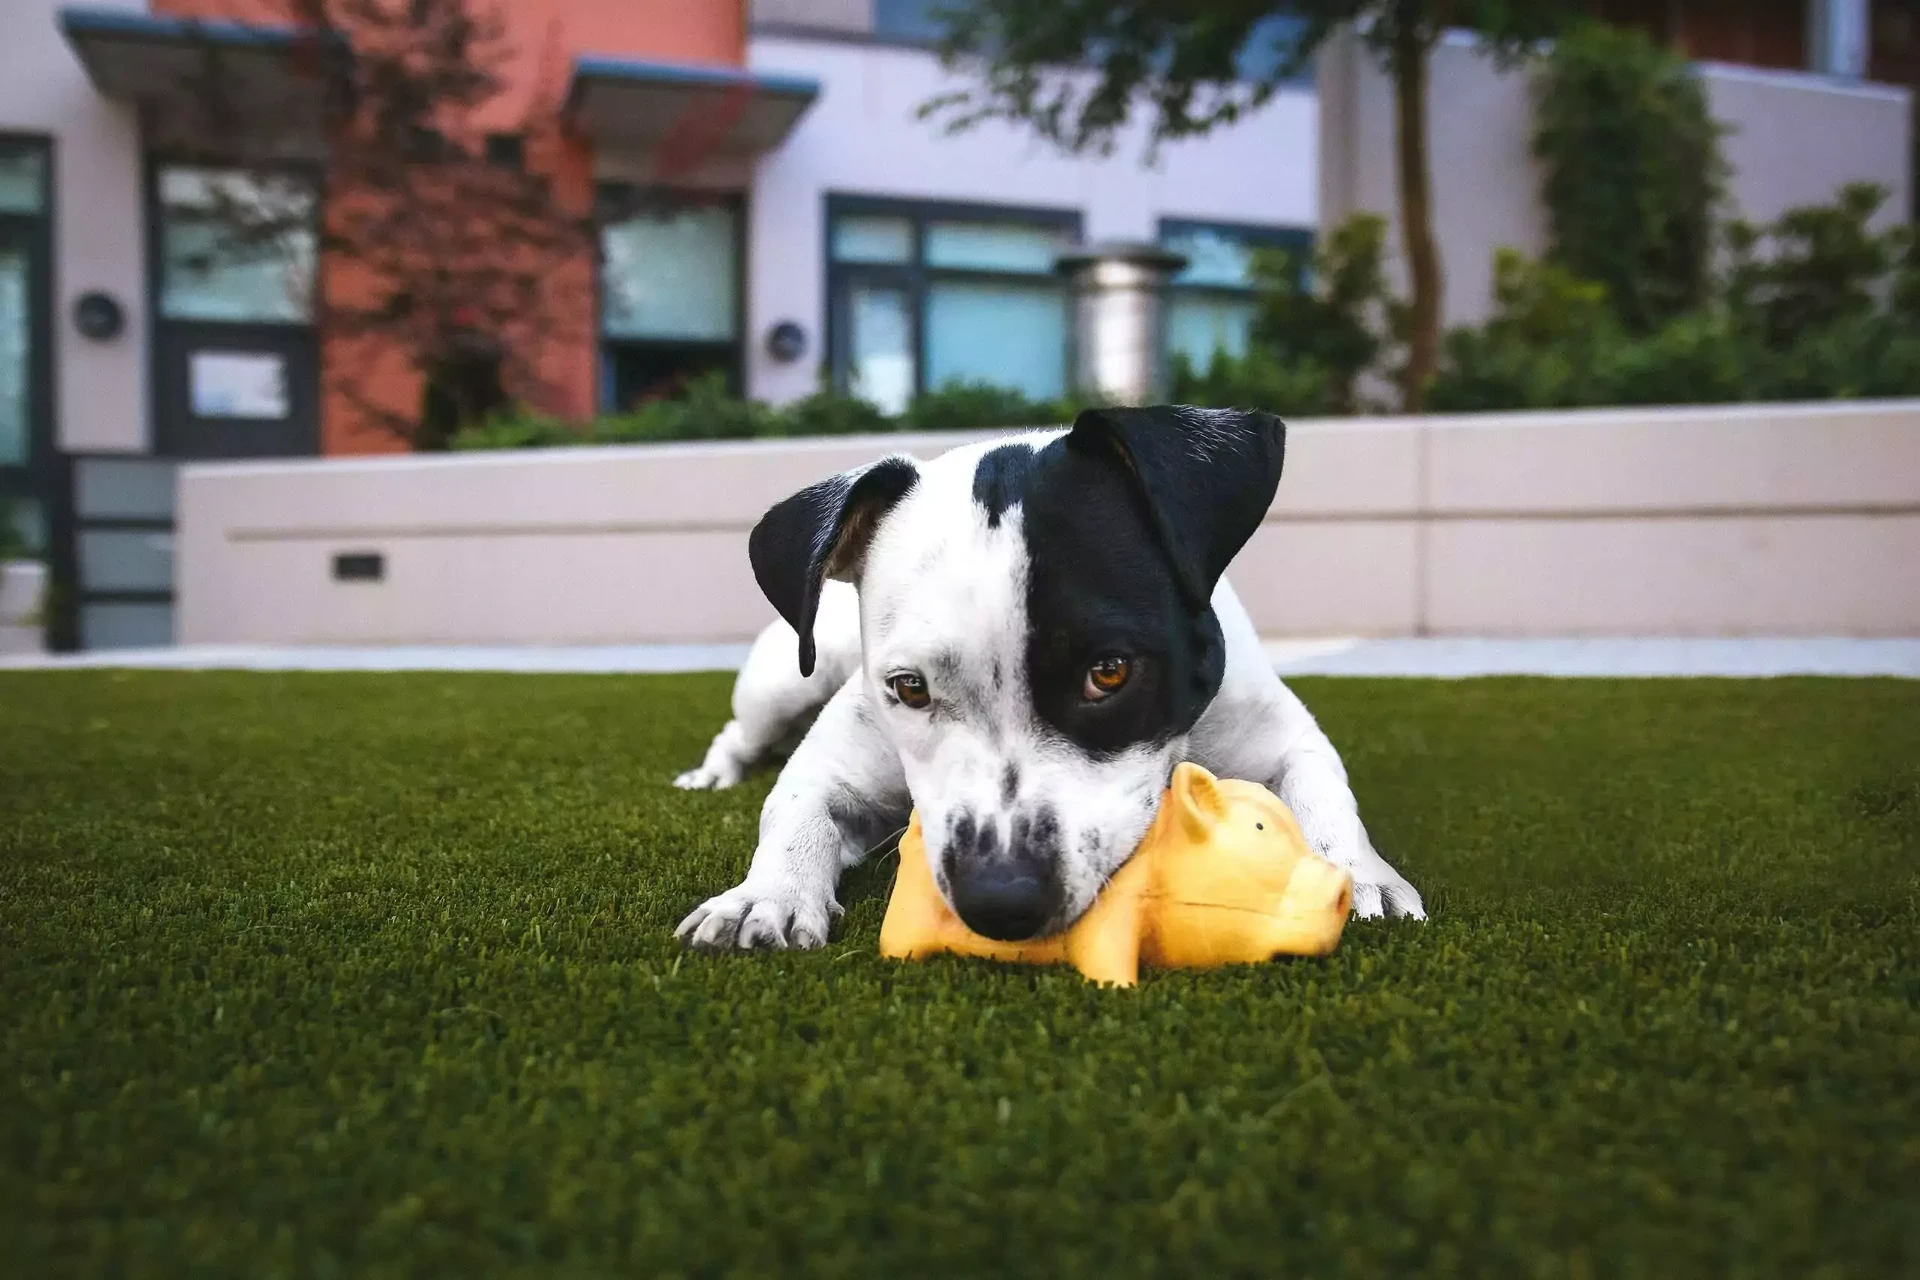 dog with black and white fur chewing on a yellow toy and lying on the grass